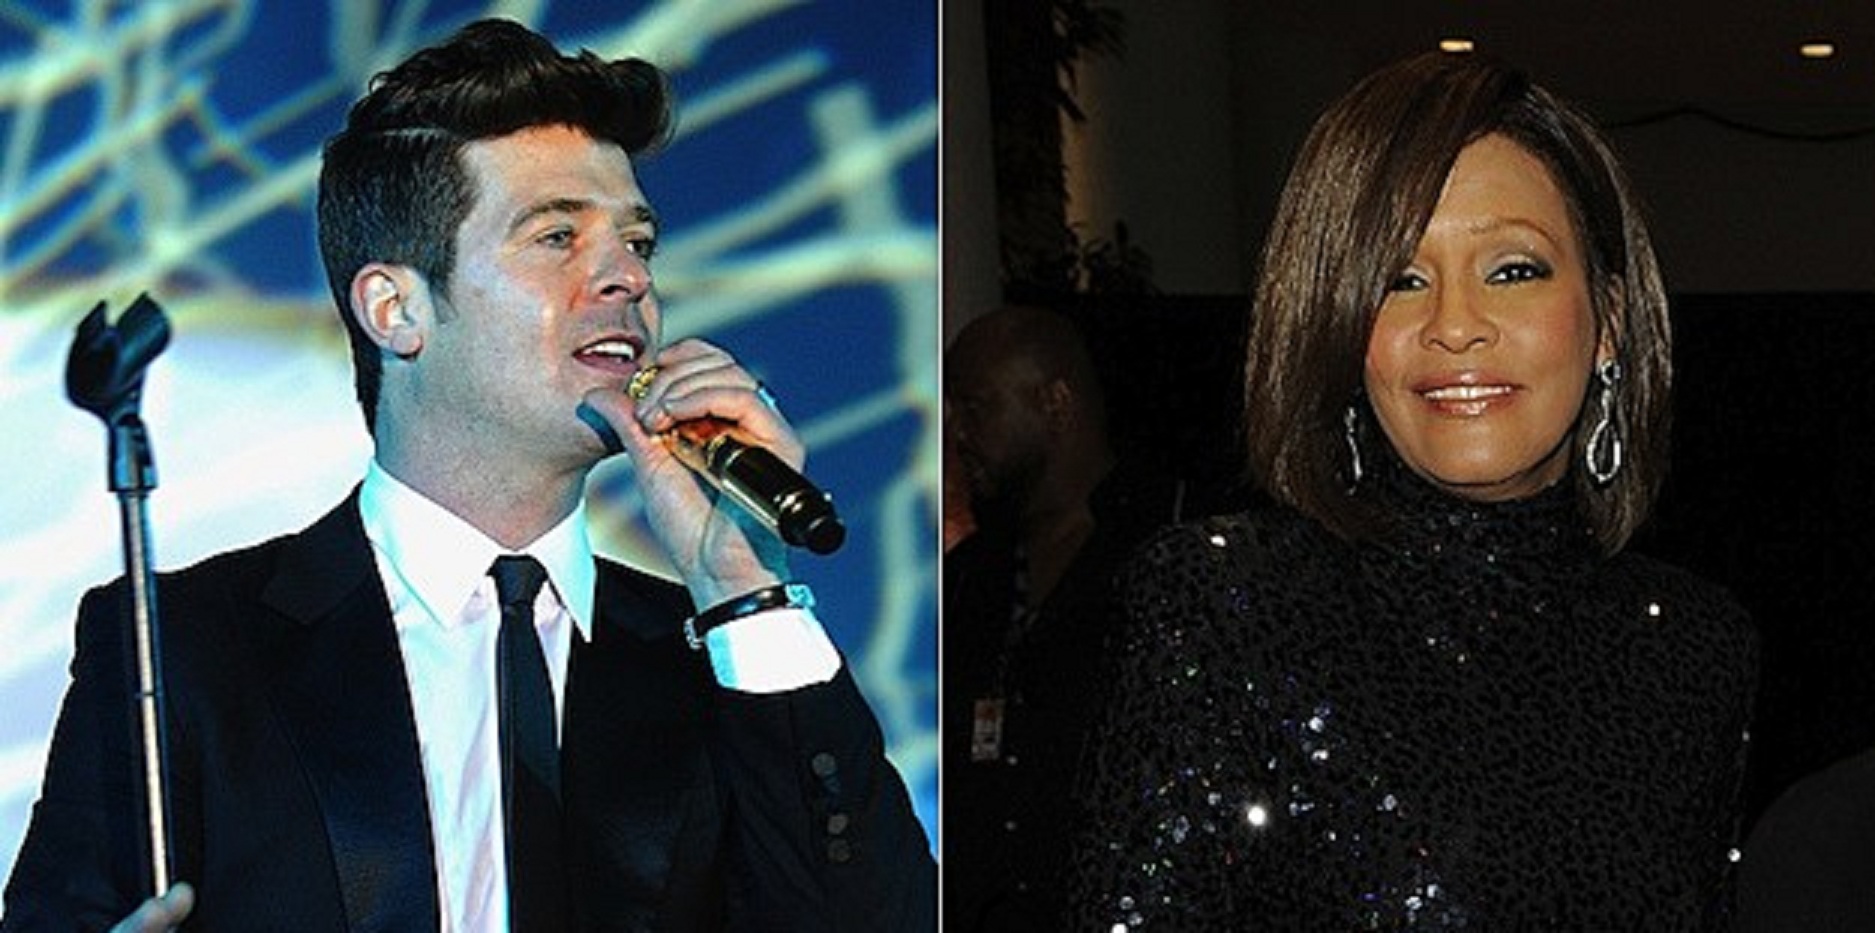 Unearthing This Stunning ‘Exhale’ Mashup Between Whitney Houston And Robin Thicke!